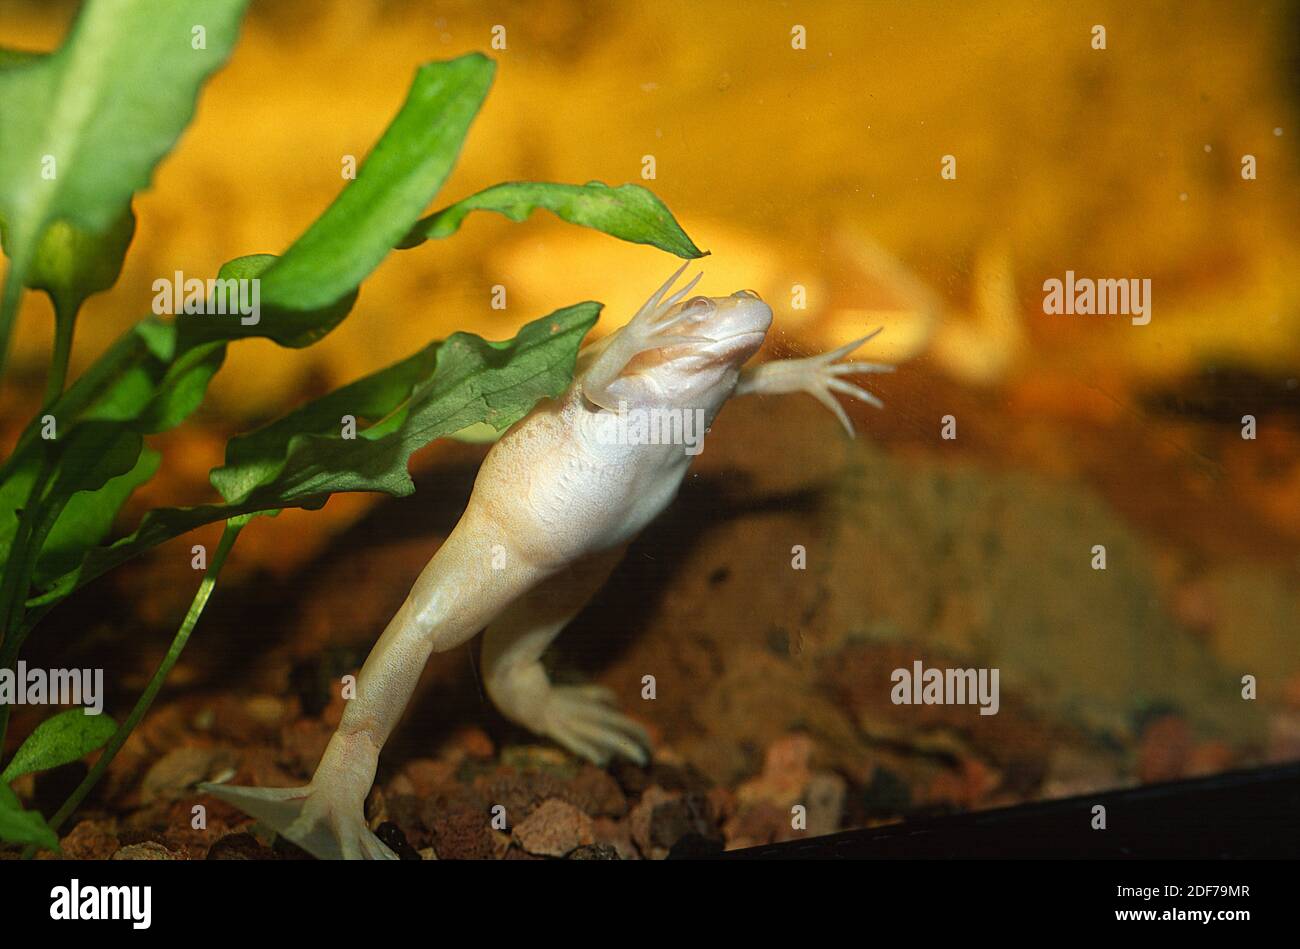 African clawed frog (Xenopus laevis) is native to Sub-Saharan Africa. Stock Photo